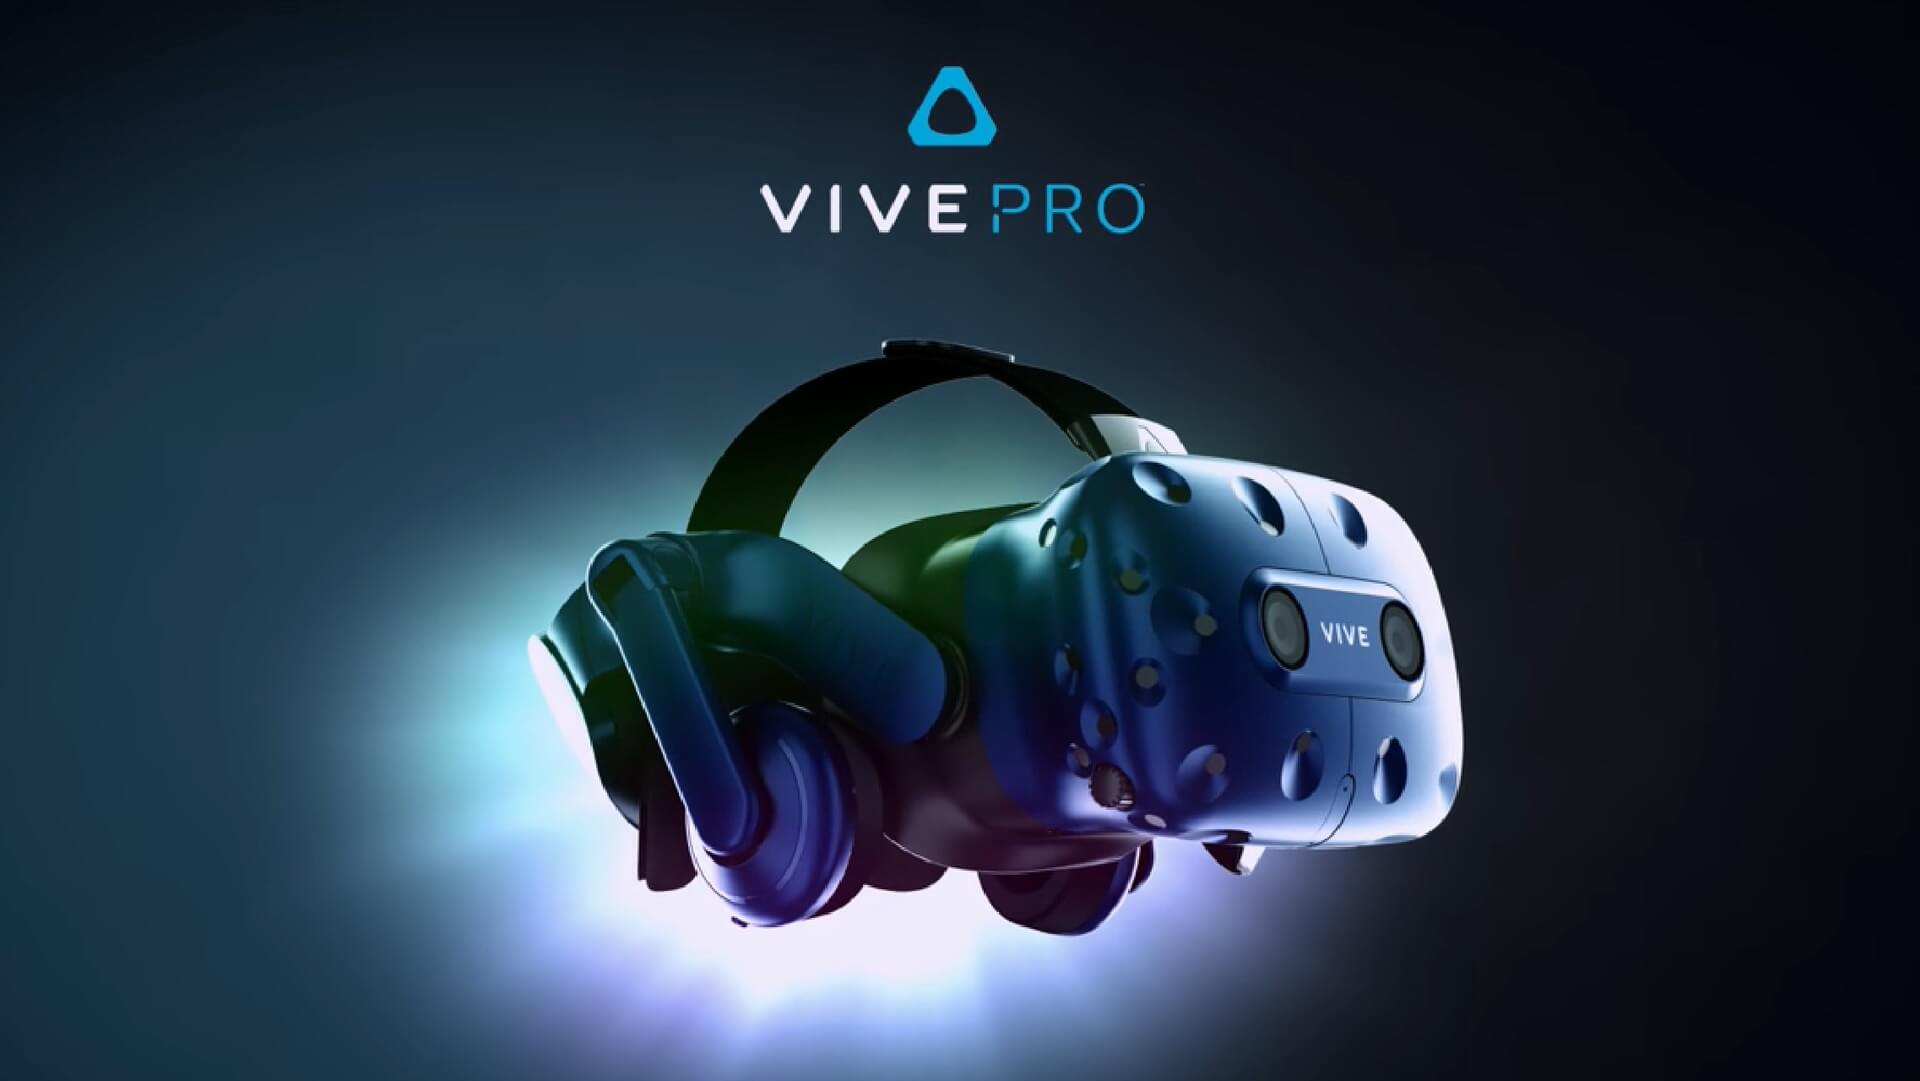 HTC Vive Pro headset releases on April 5th, will be priced at $799